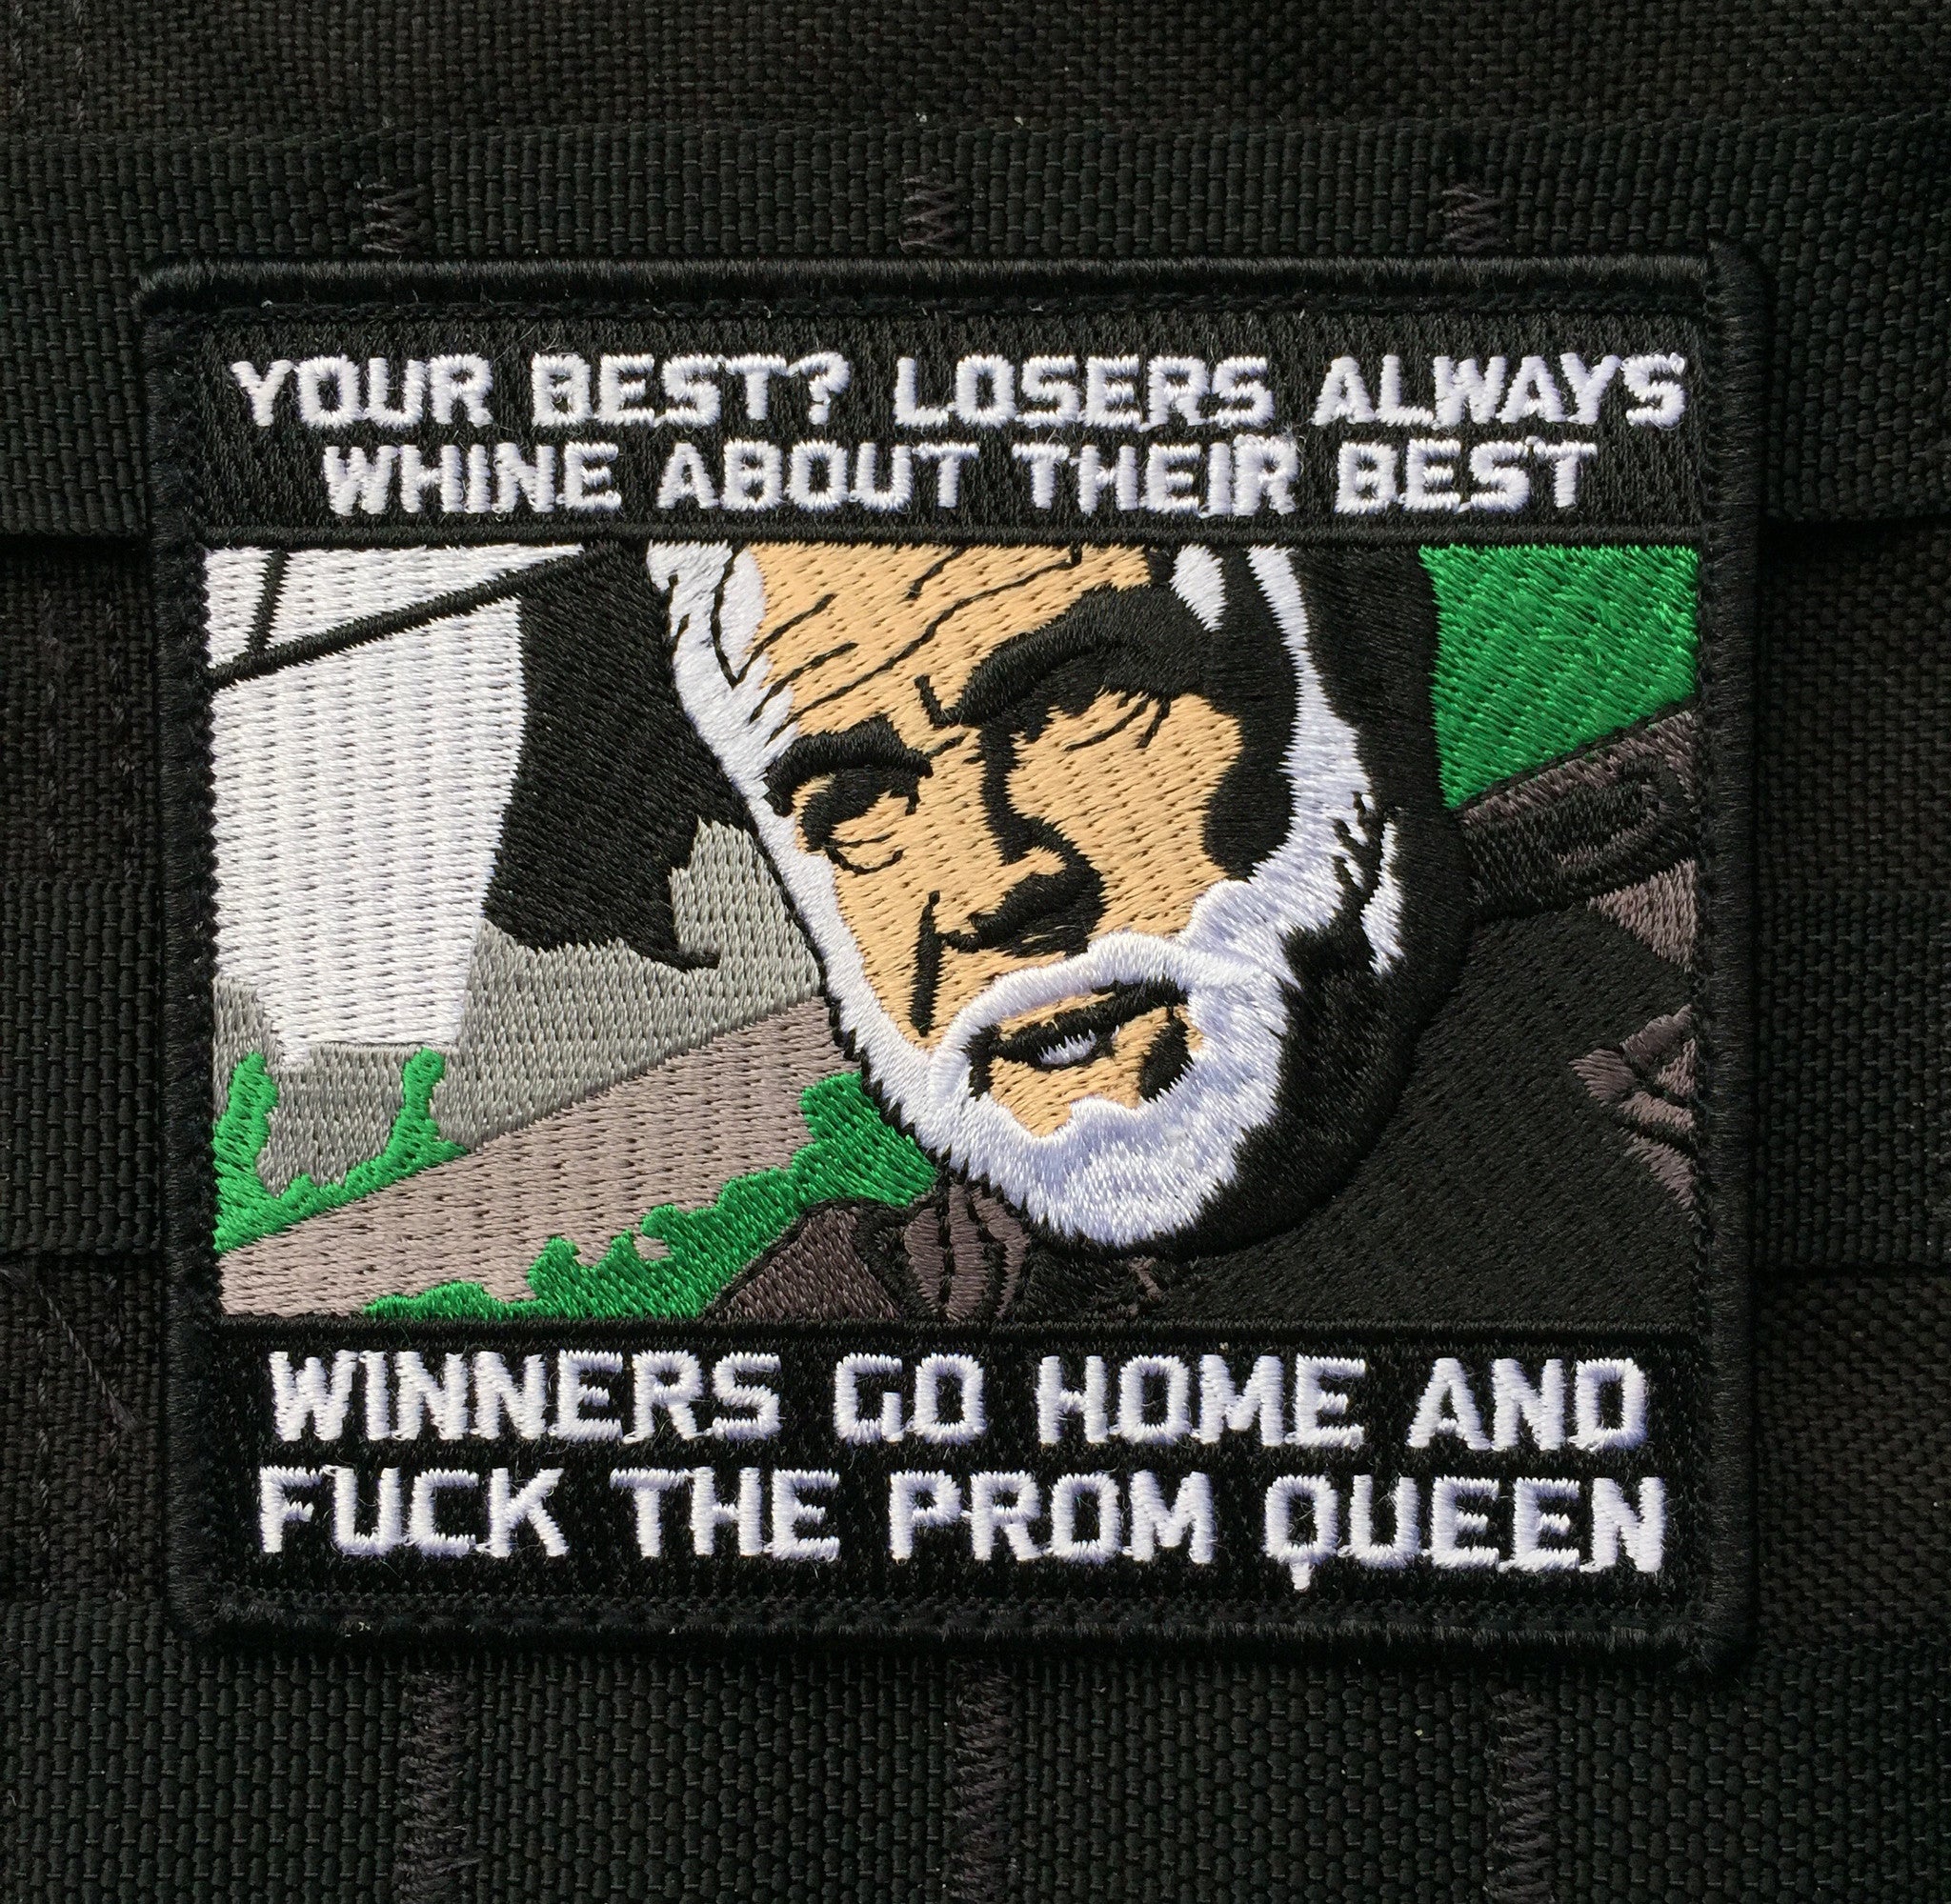 Black and white Embroidered patch with a man’s head in the middle and text above and below that reads Losers always whine about their best winners go home and fuck the prom queen